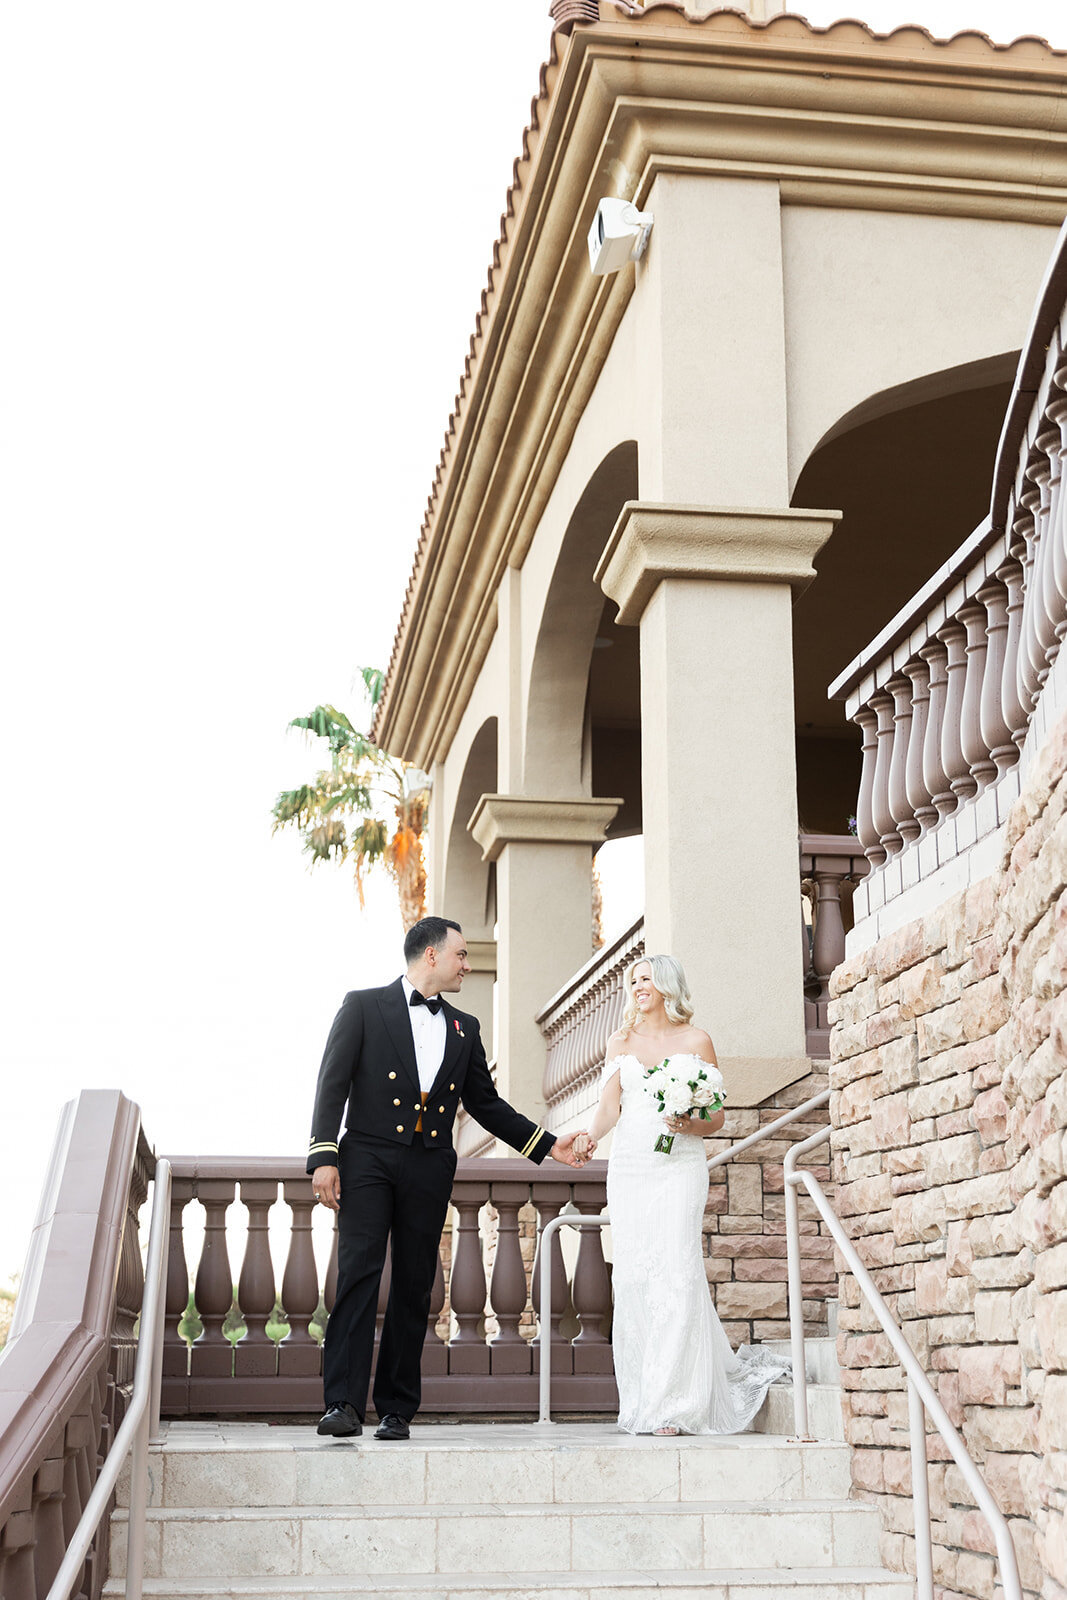 Karlie Colleen Photography - Holly & Ronnie Wedding - Seville Country Club - Gilbert Arizona-797